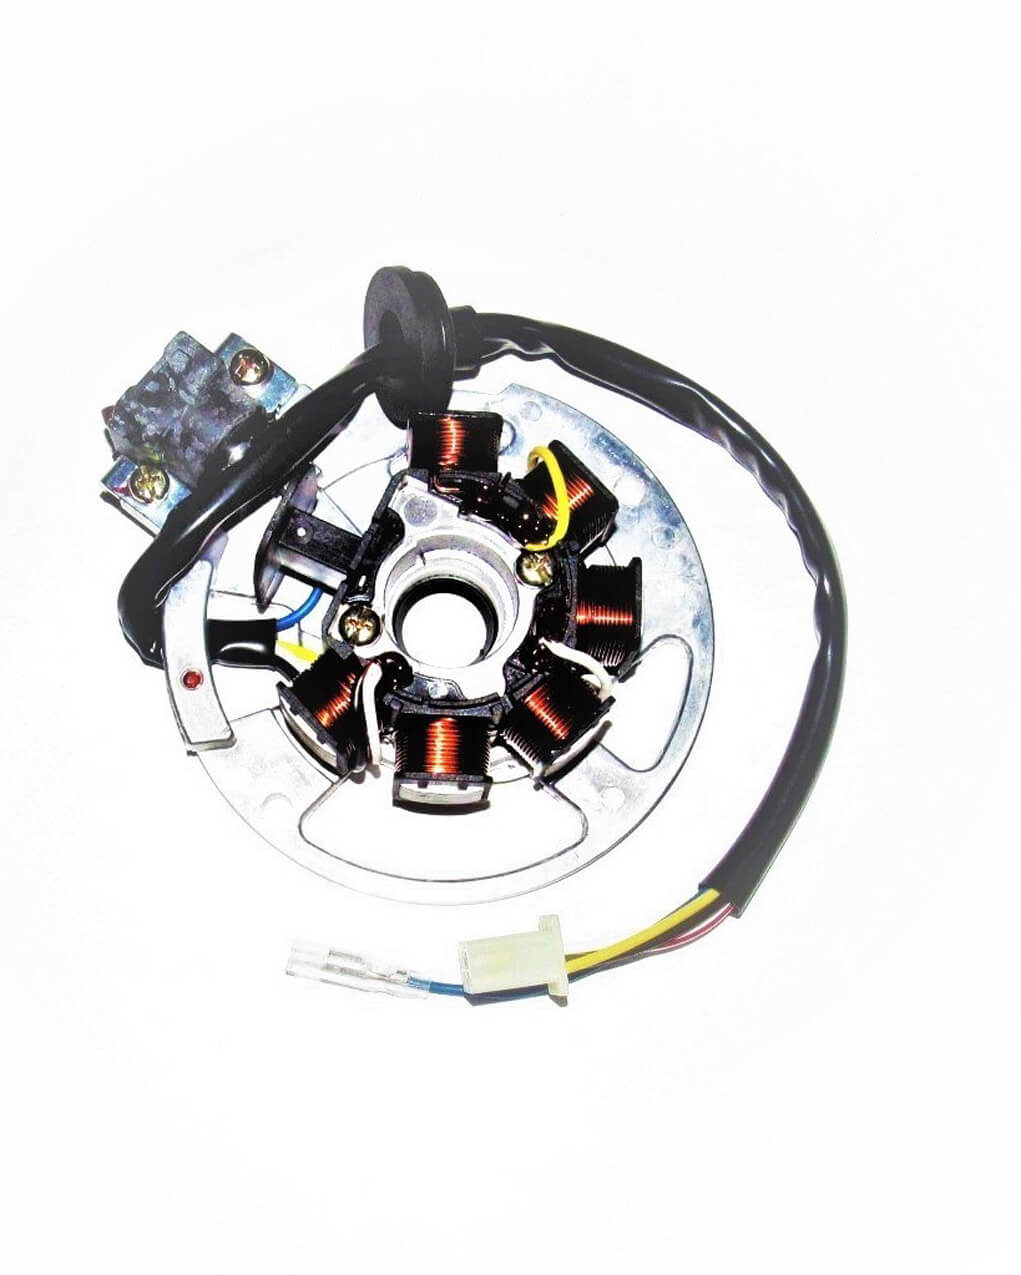 Stator 2 Stroke Fits E-Ton Beamer 50, Matrix 50, Adly, 49cc Scooters + other brands (Top Quality-Power, Made in Taiwan) - Click Image to Close